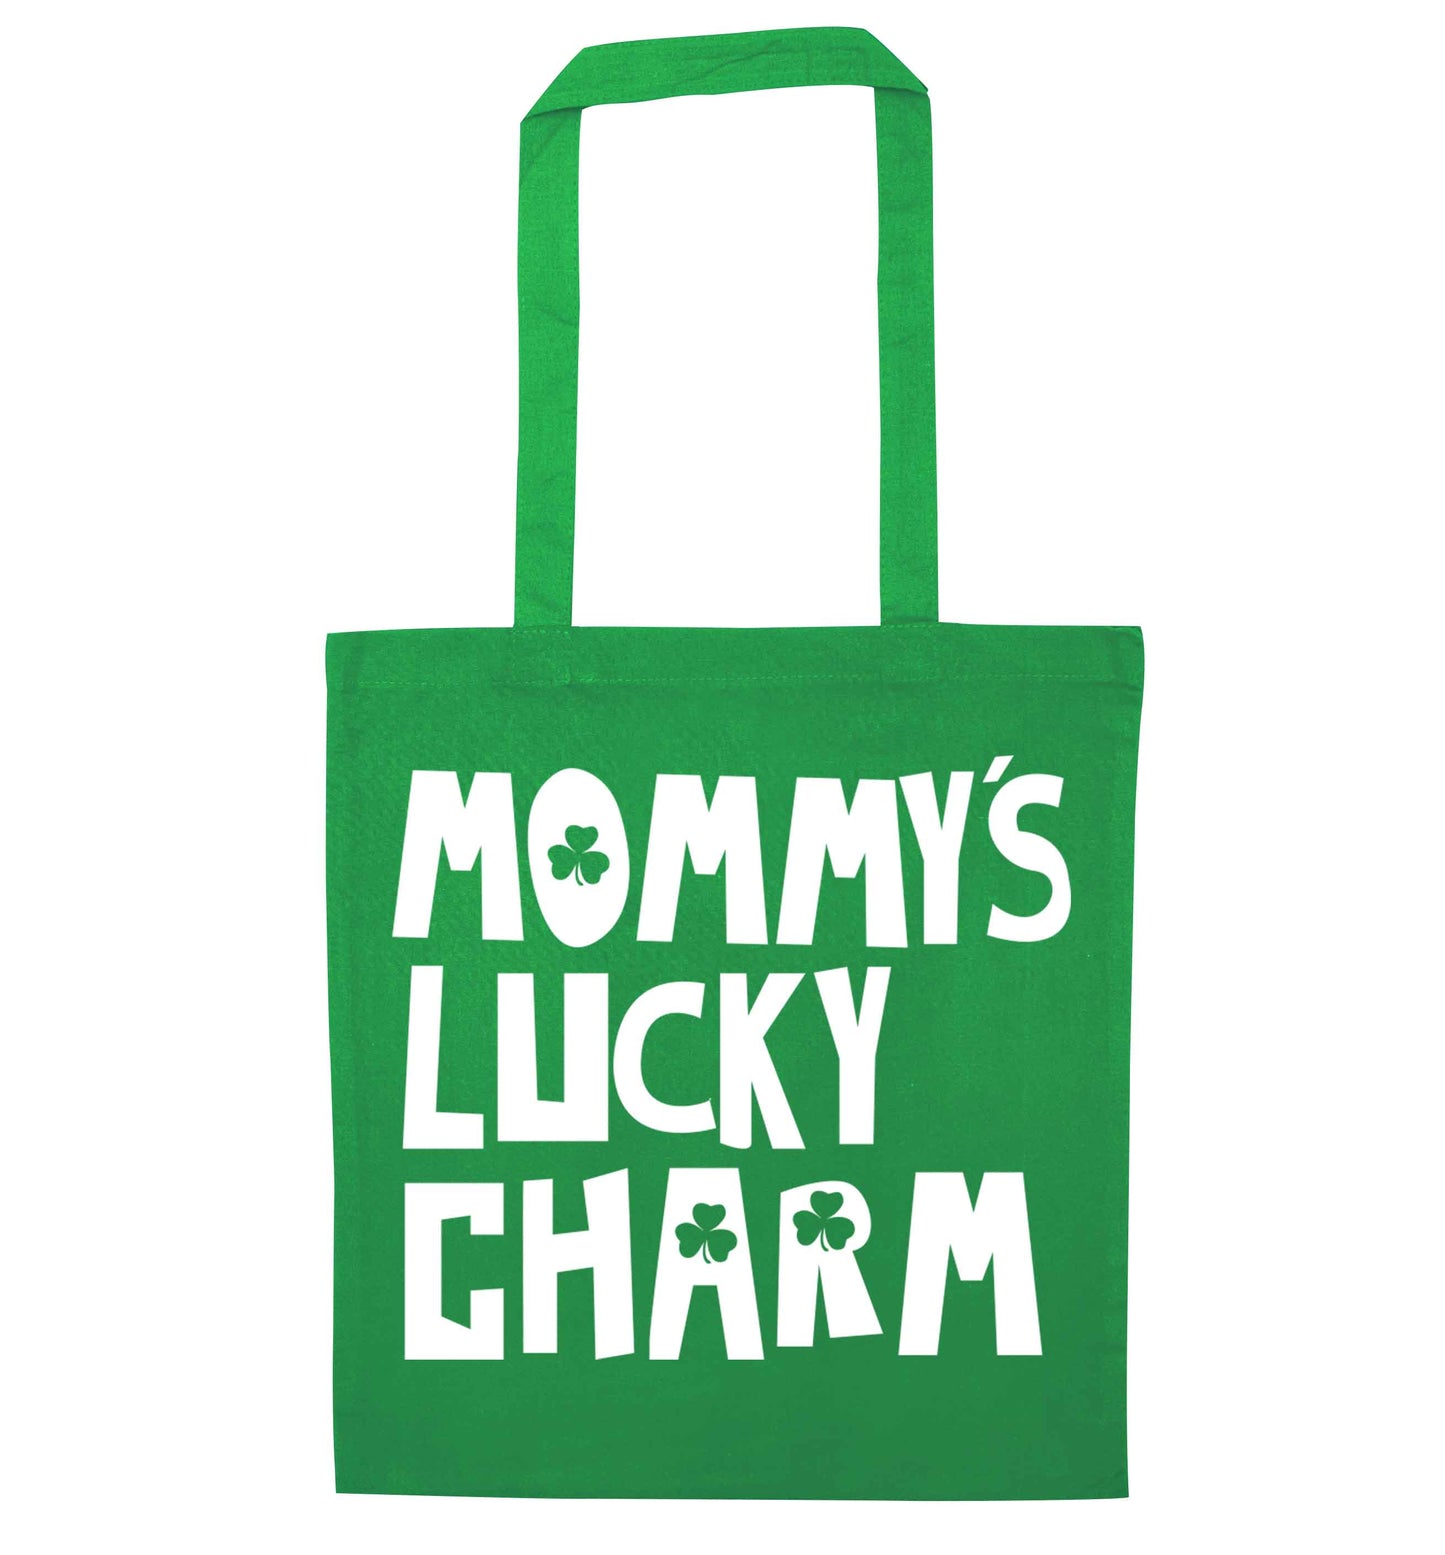 Mommy's lucky charm green tote bag